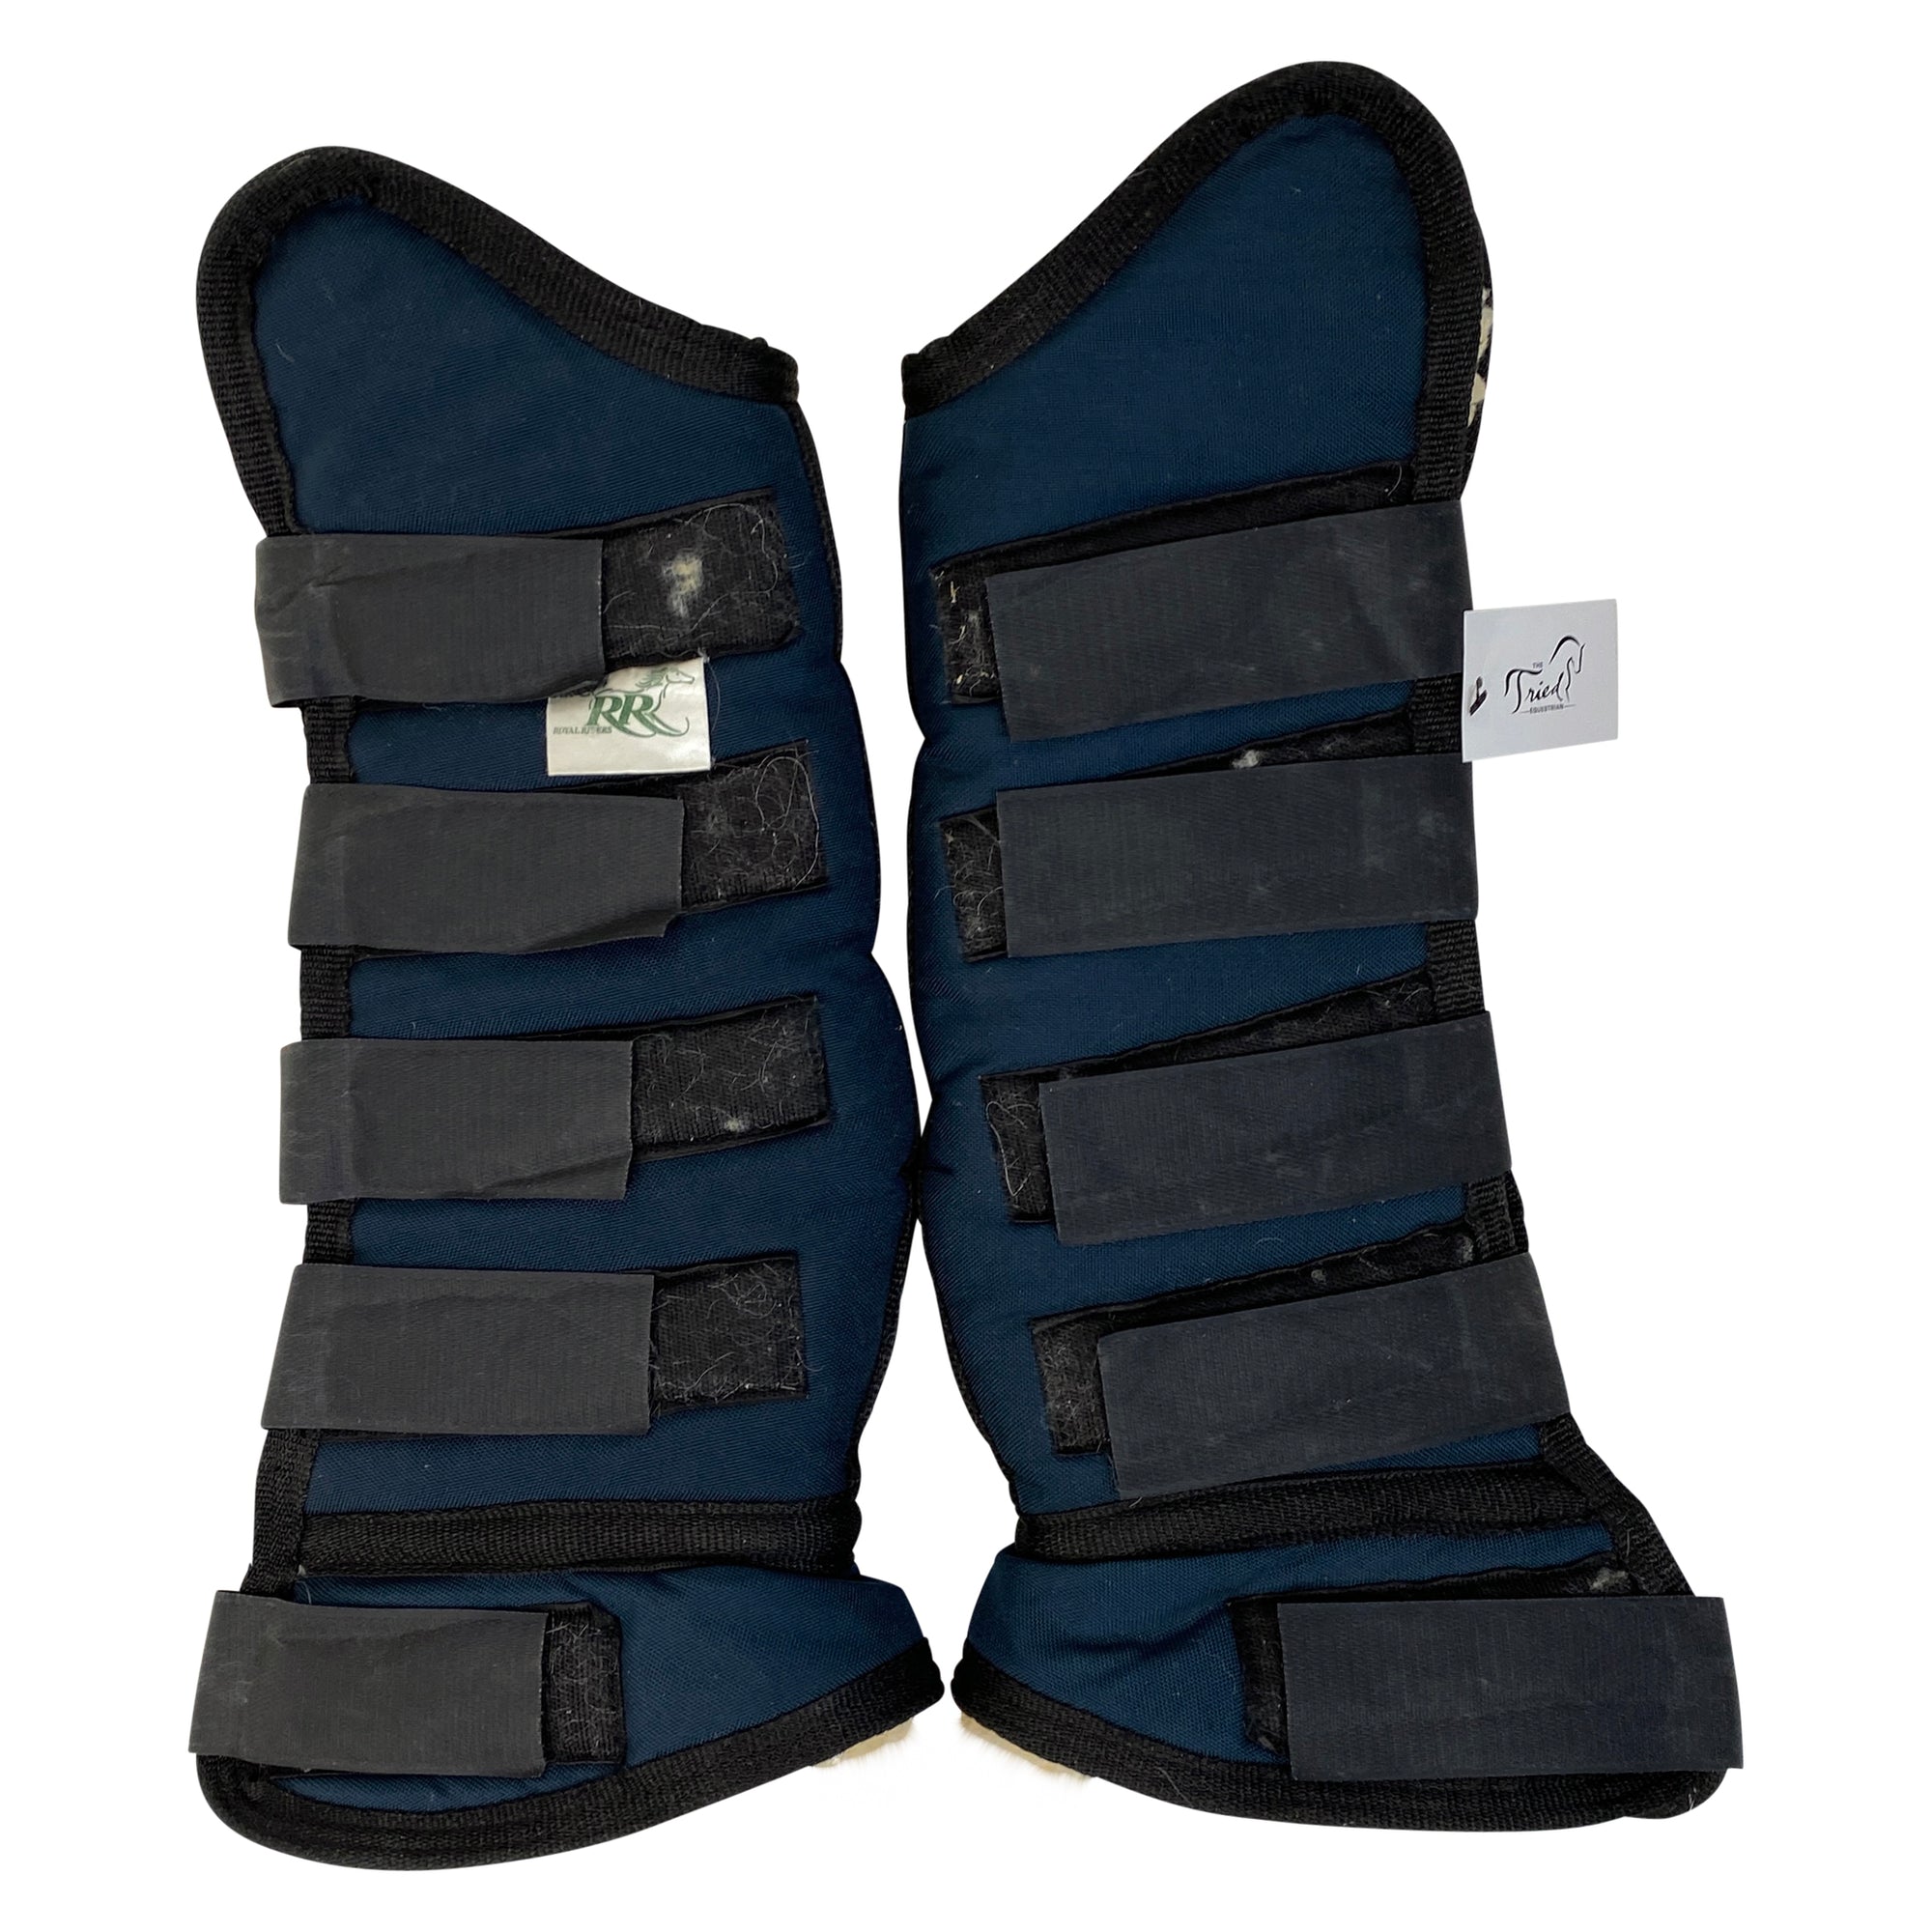 Royal Riders Fleece Lined Shipping Boots in Blue